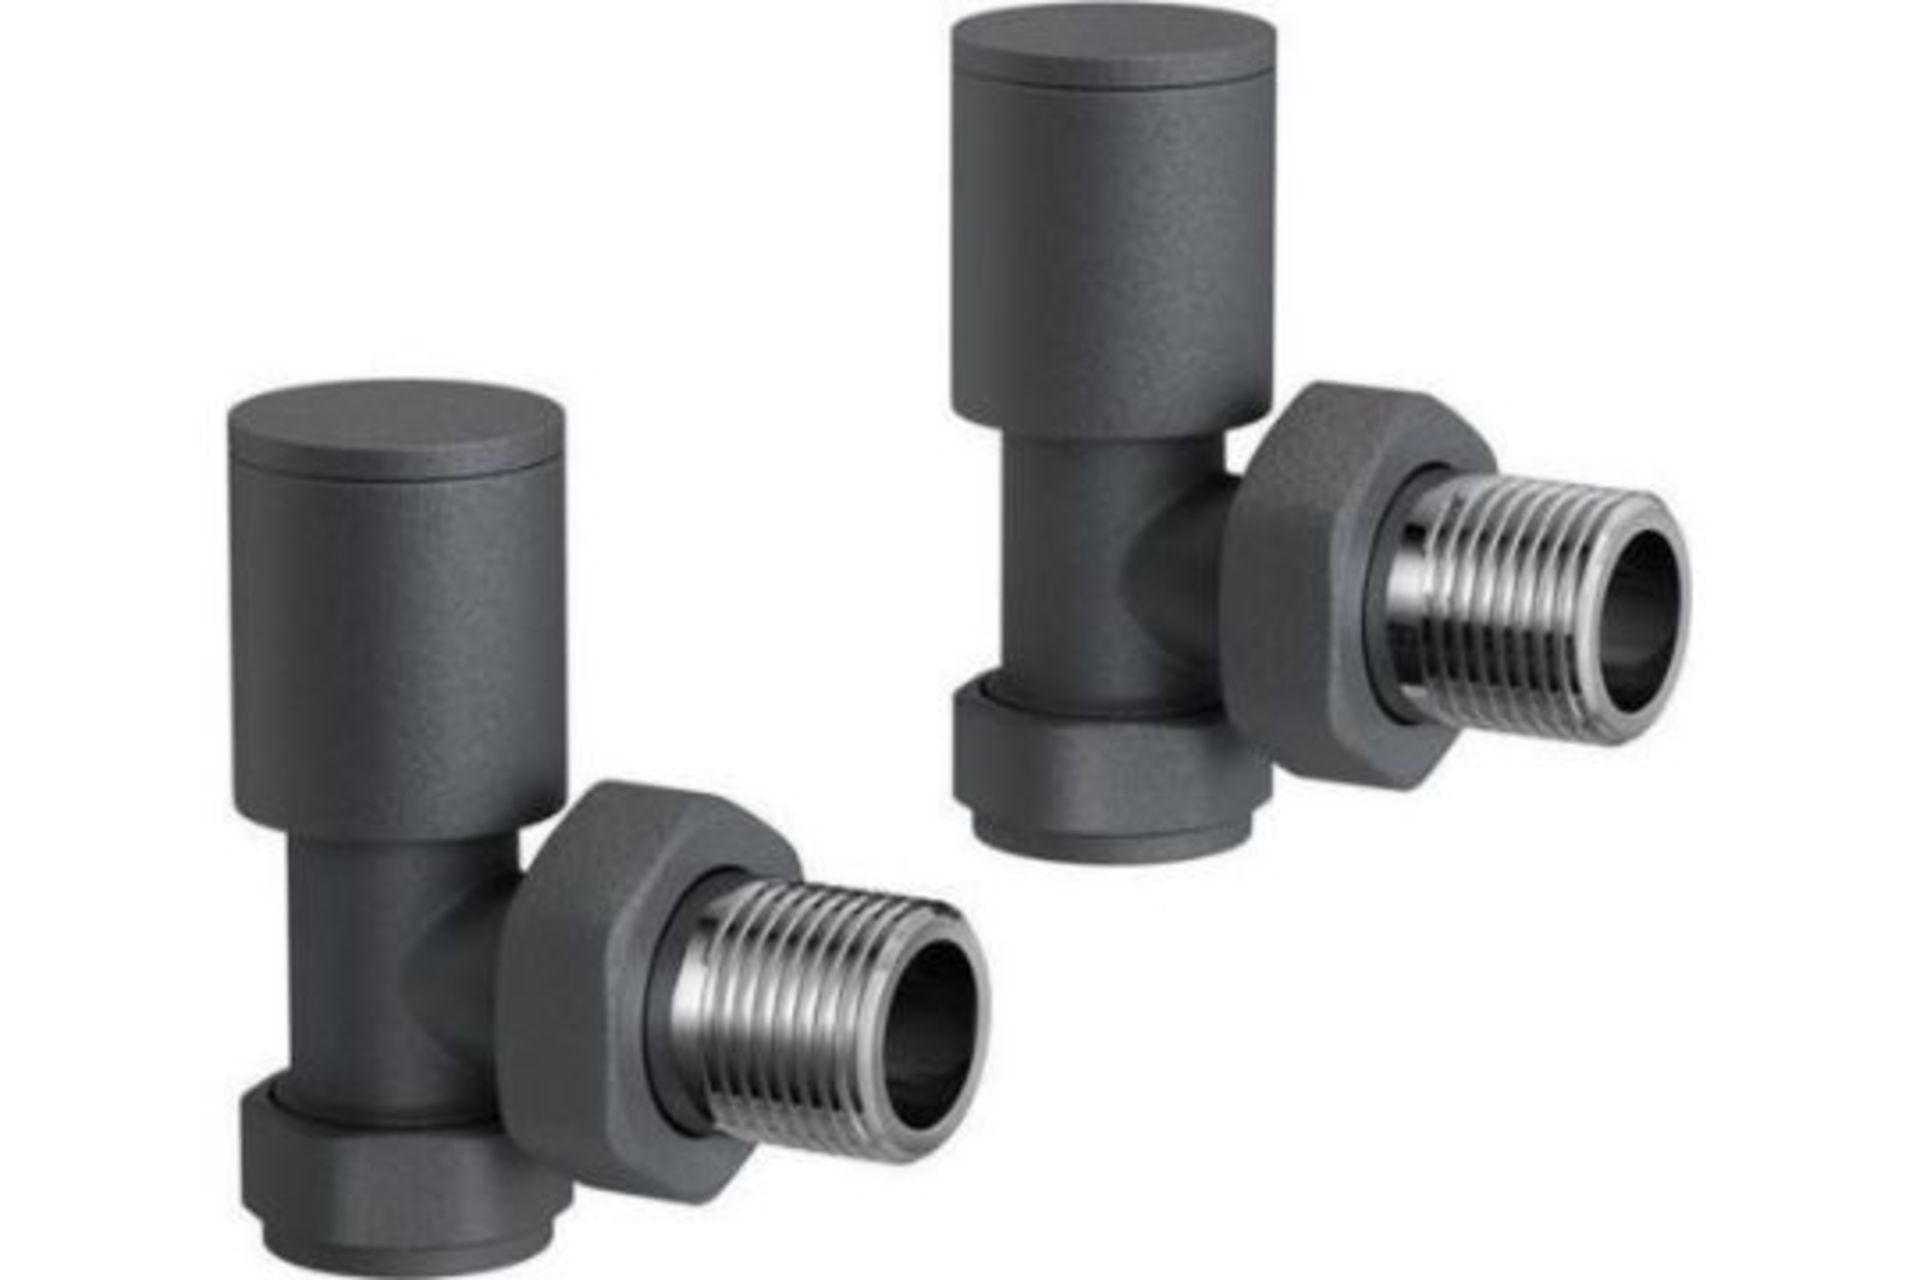 15mm Standard Connection Square Angled Anthracite Radiator Valves. Ra03A. Complies With BS276...